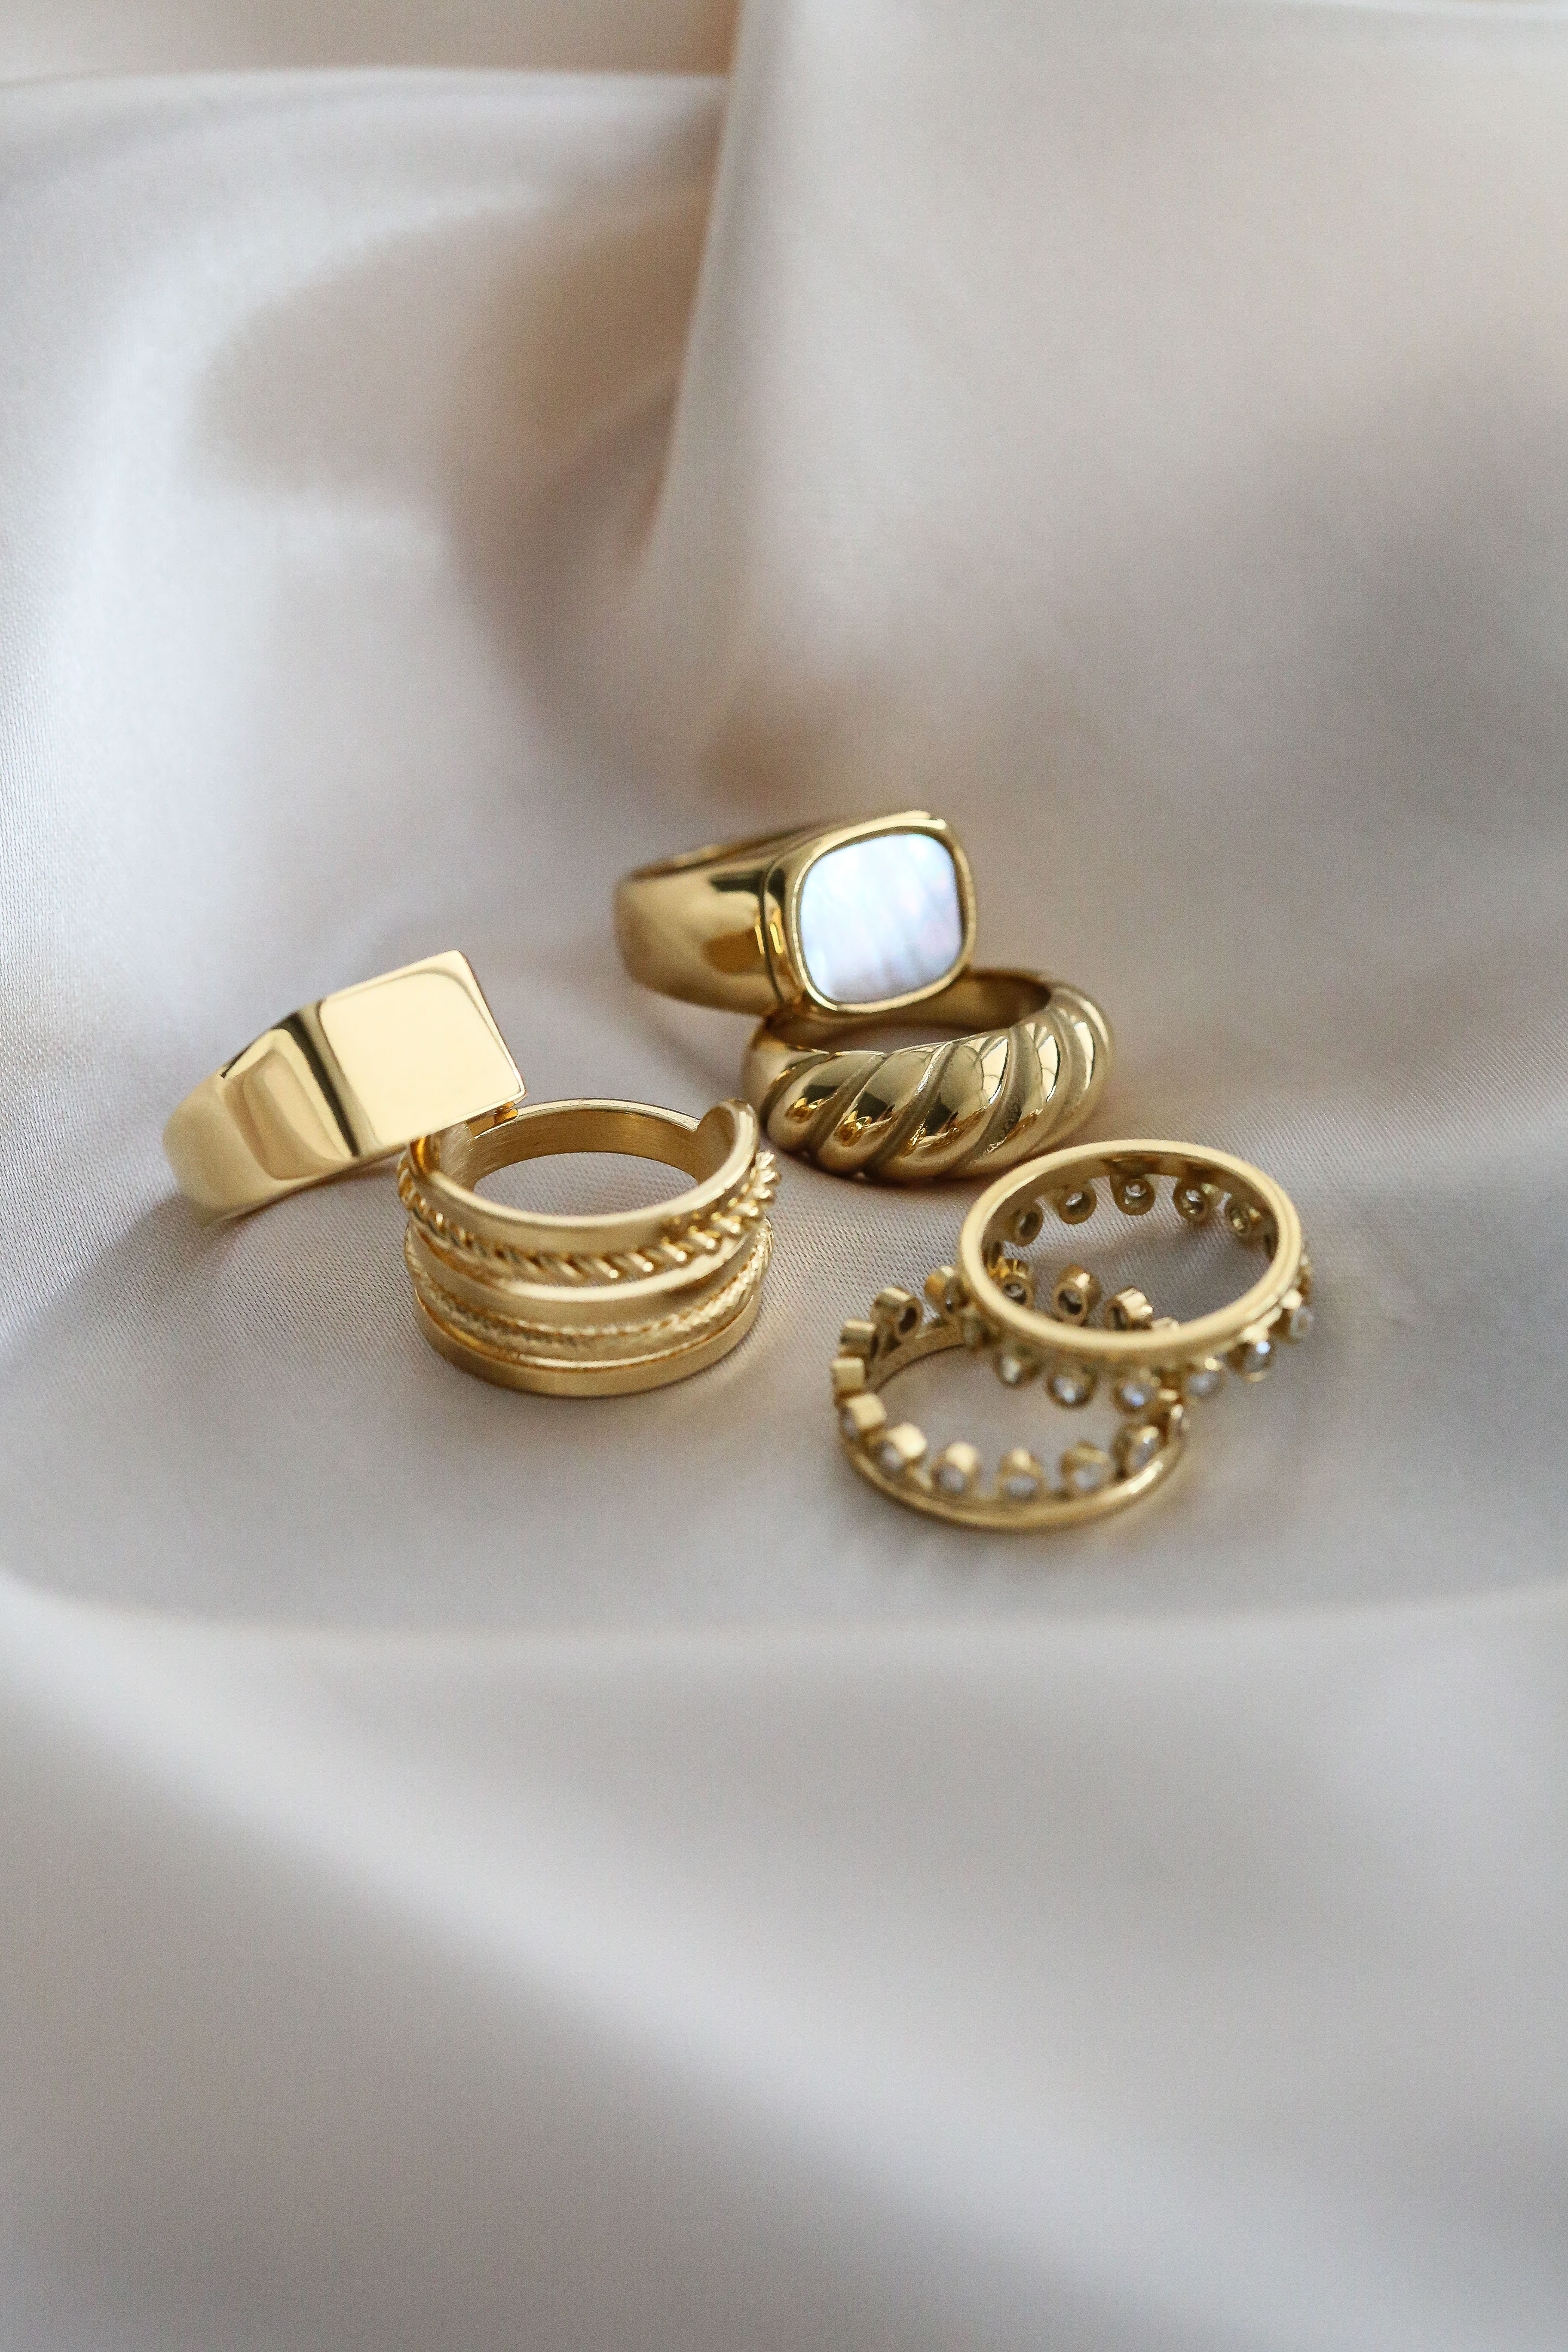 Annalise Ring - Boutique Minimaliste has waterproof, durable, elegant and vintage inspired jewelry